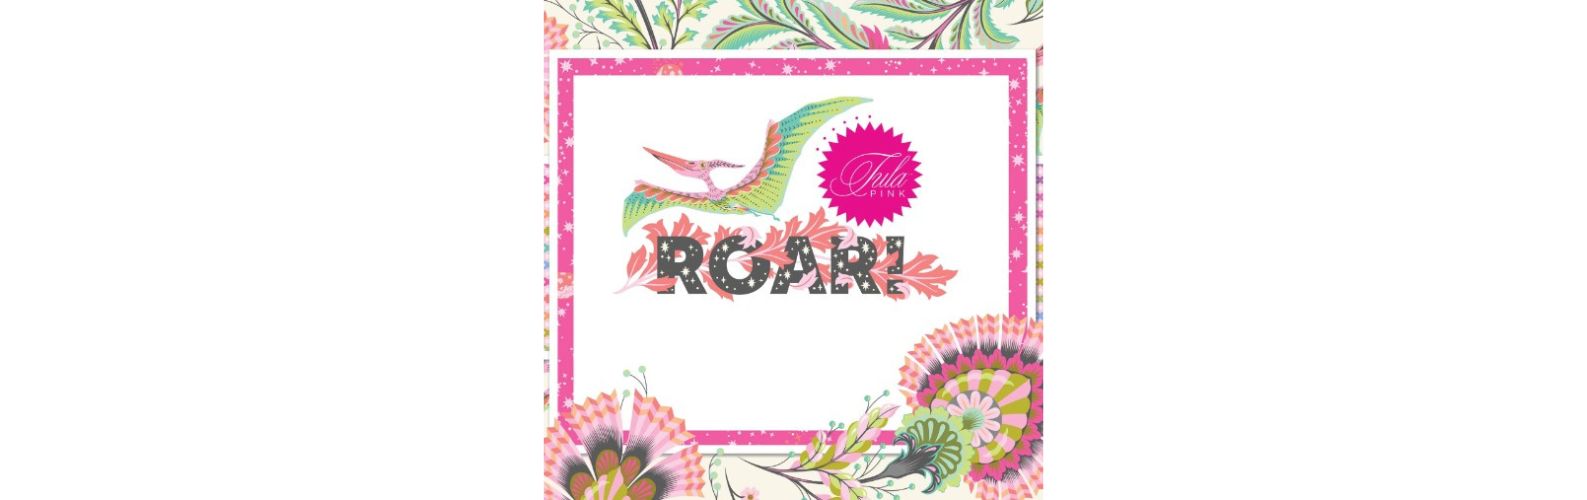 Tula Pink Roar! is about to arrive